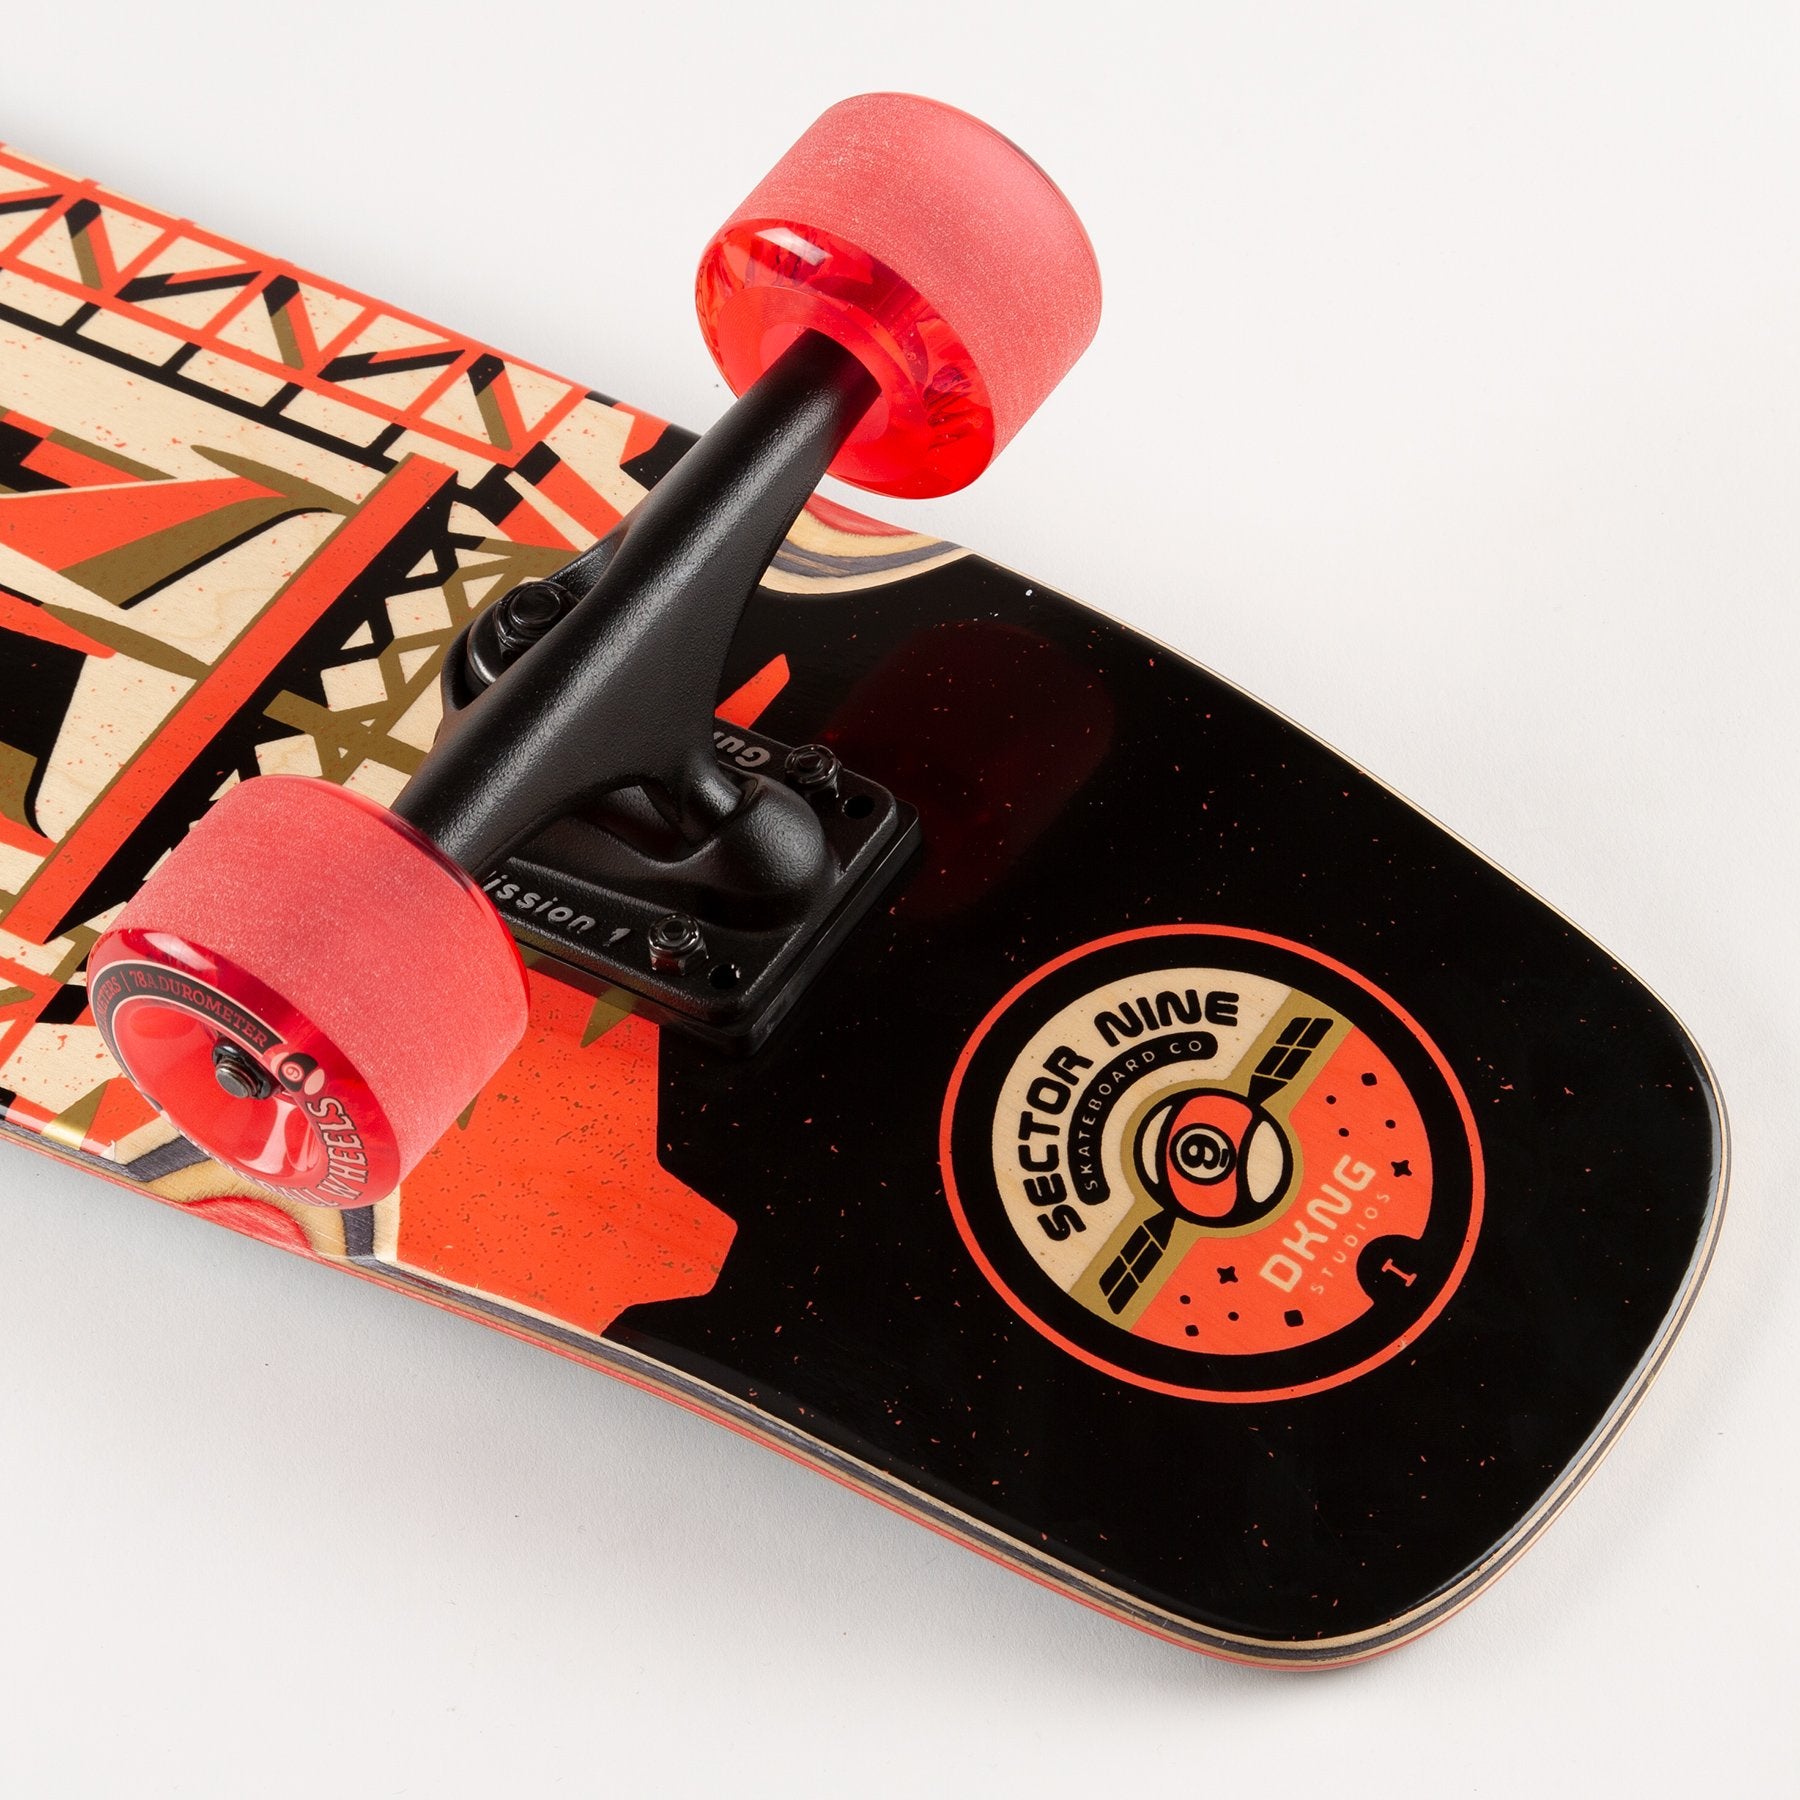 SECTOR 9 COMPLETE - DKNG LAUNCH (28.5&quot; x 7.875&quot;) - The Drive Skateshop